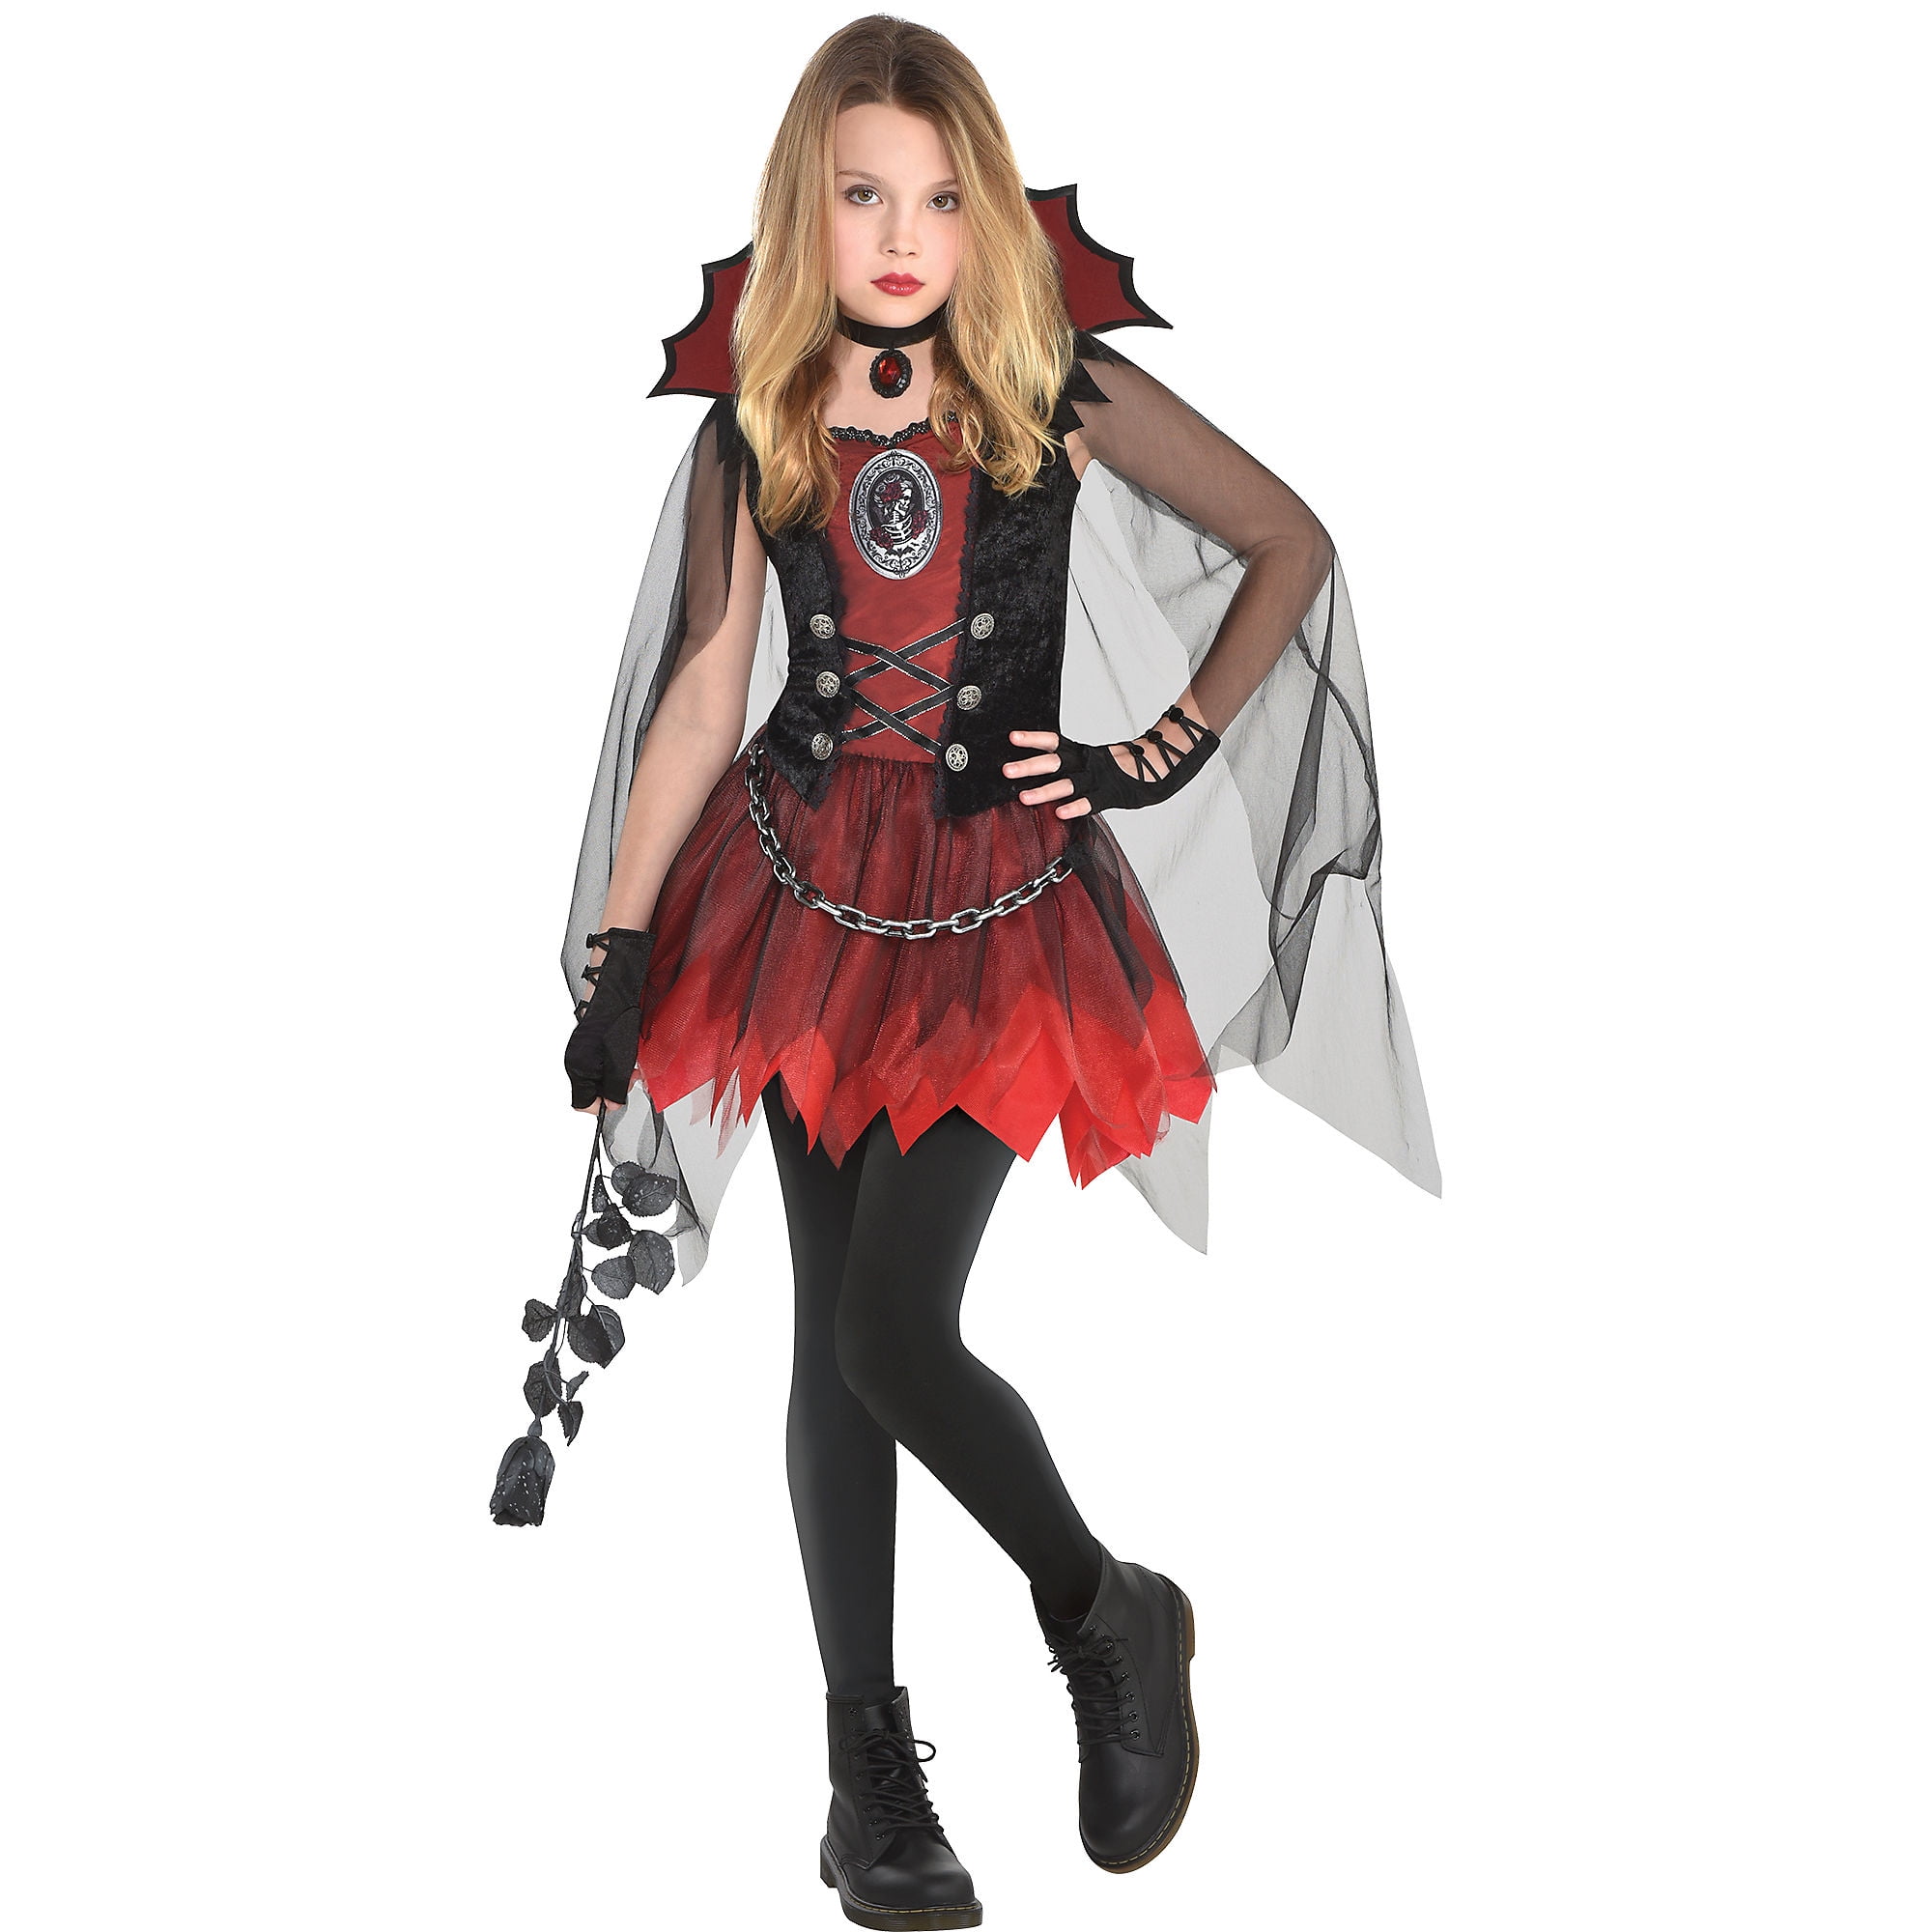 Suit Yourself Dark Vampire Costume For Girls Size Large 12 14 Includes Dress Cape And